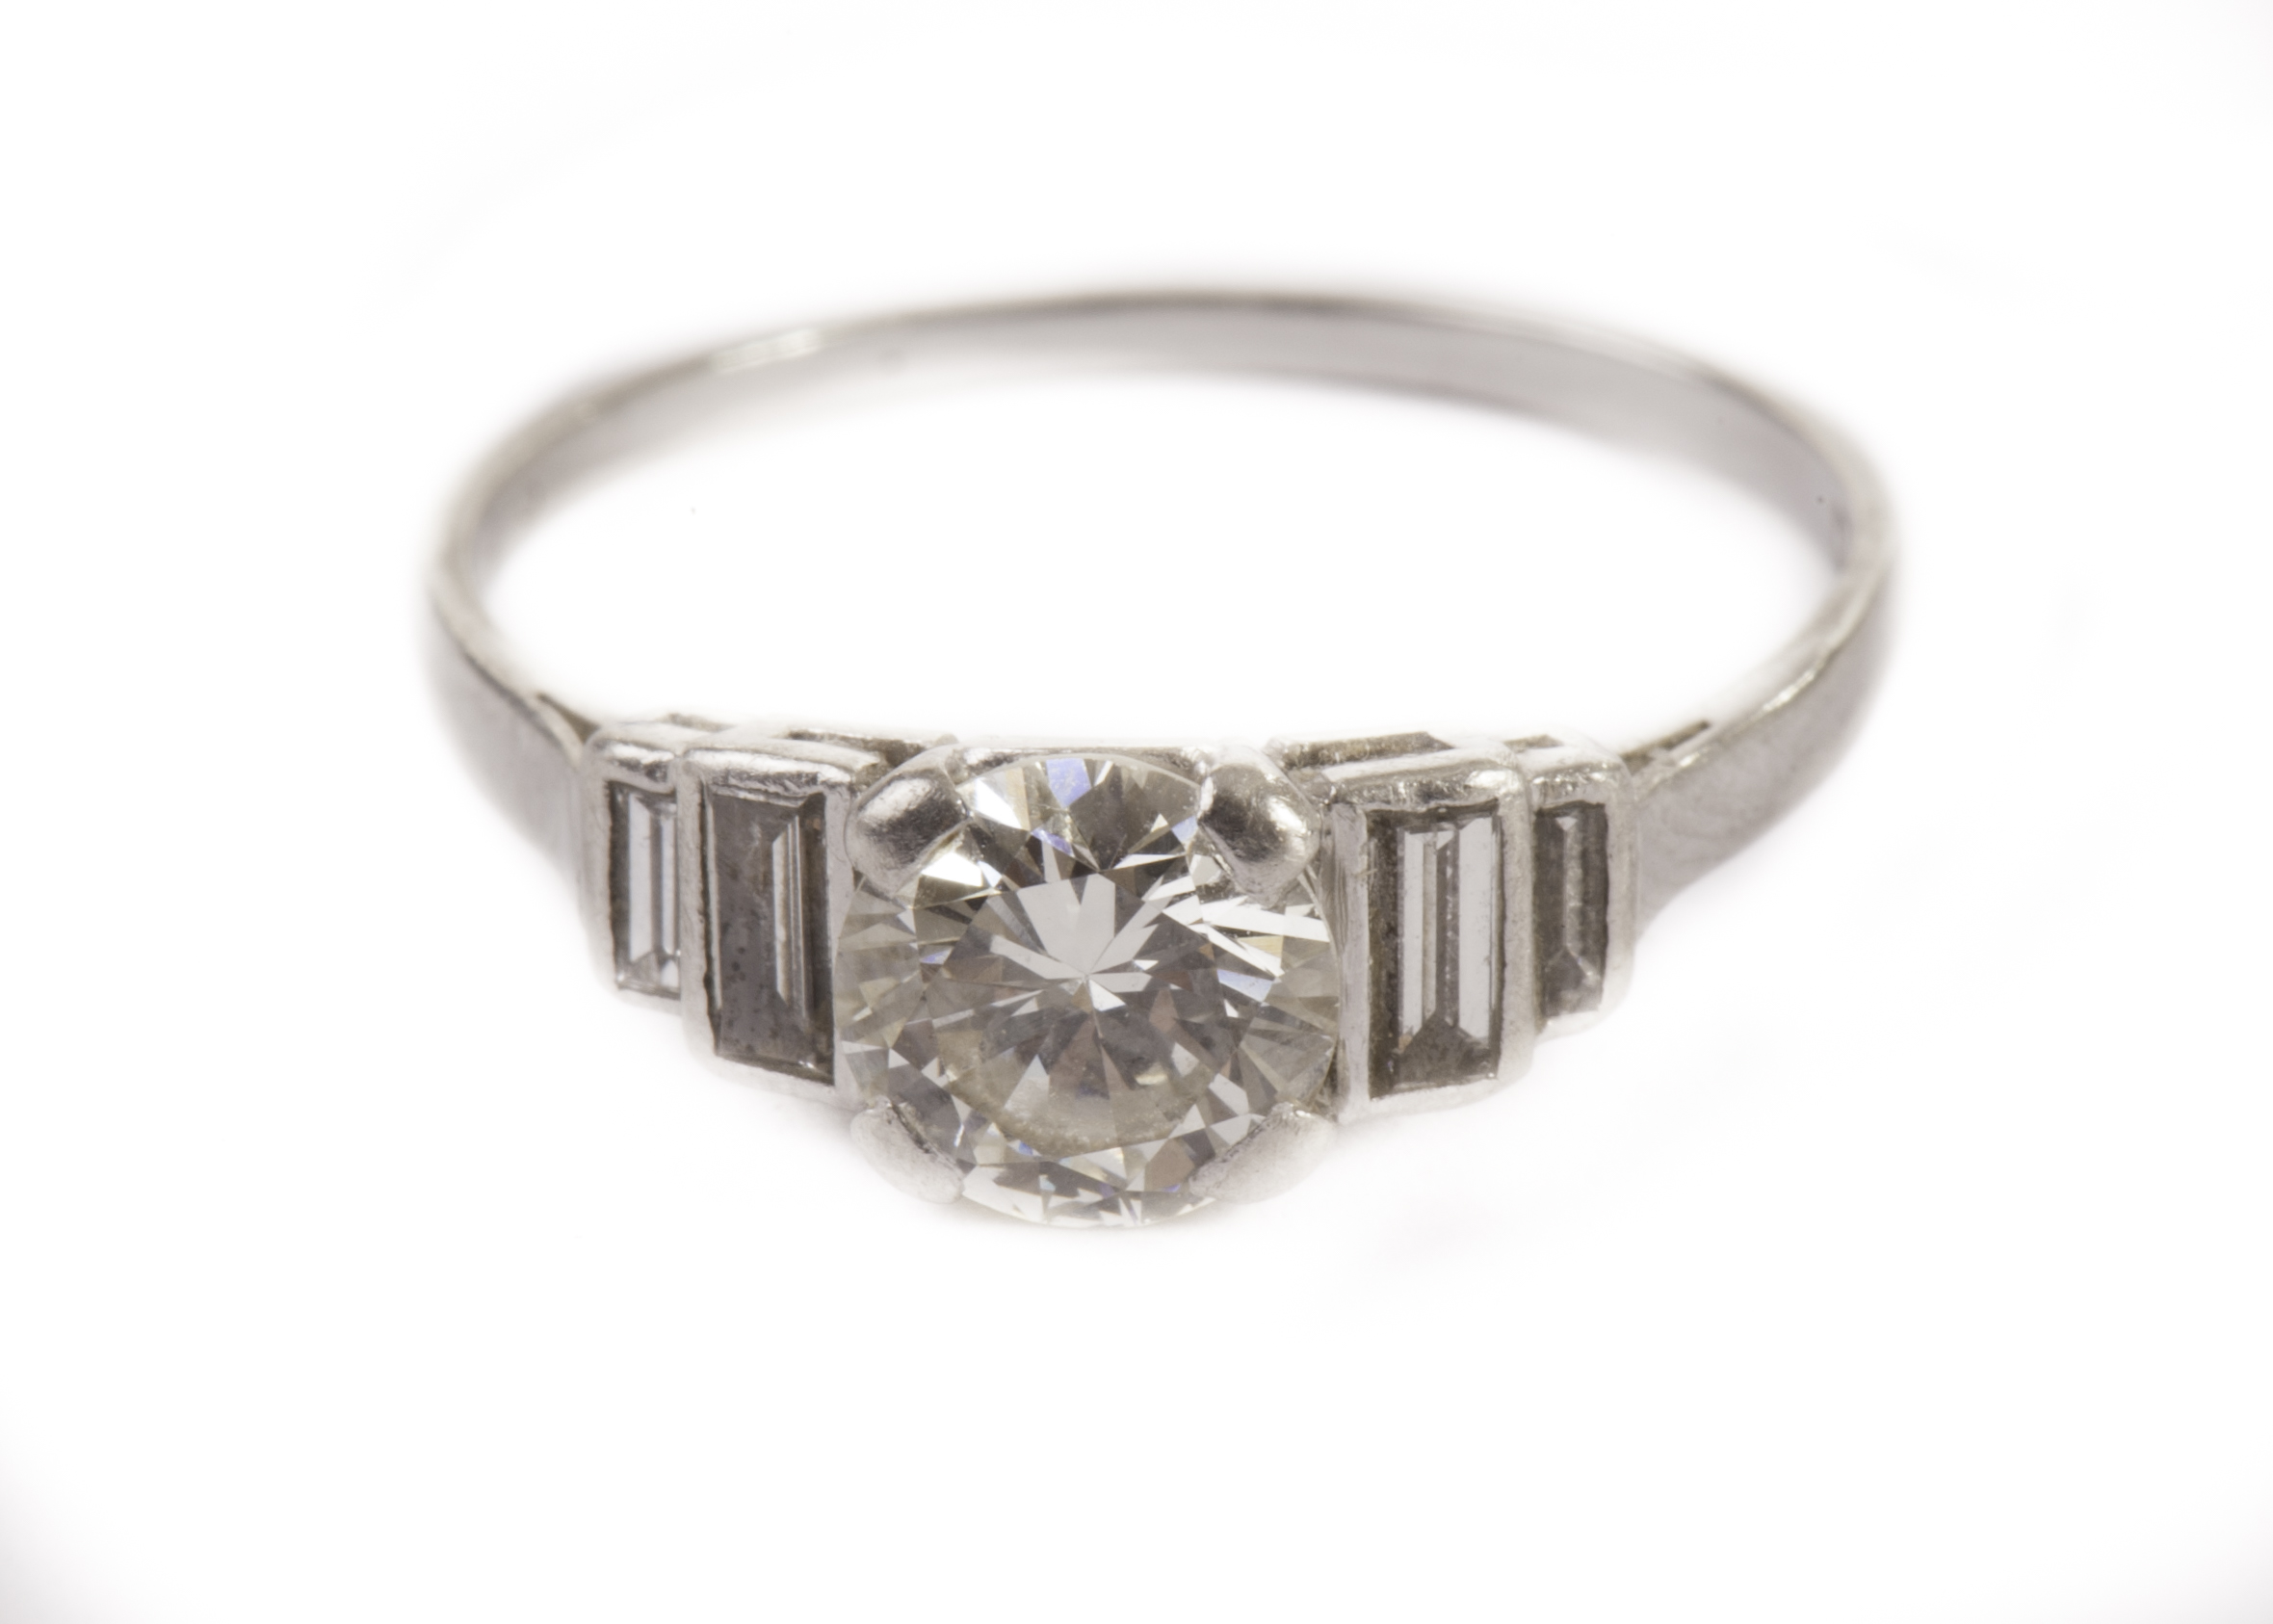 A pretty Art Deco period diamond engagement ring, with a good quality approx 1ct brilliant cut in